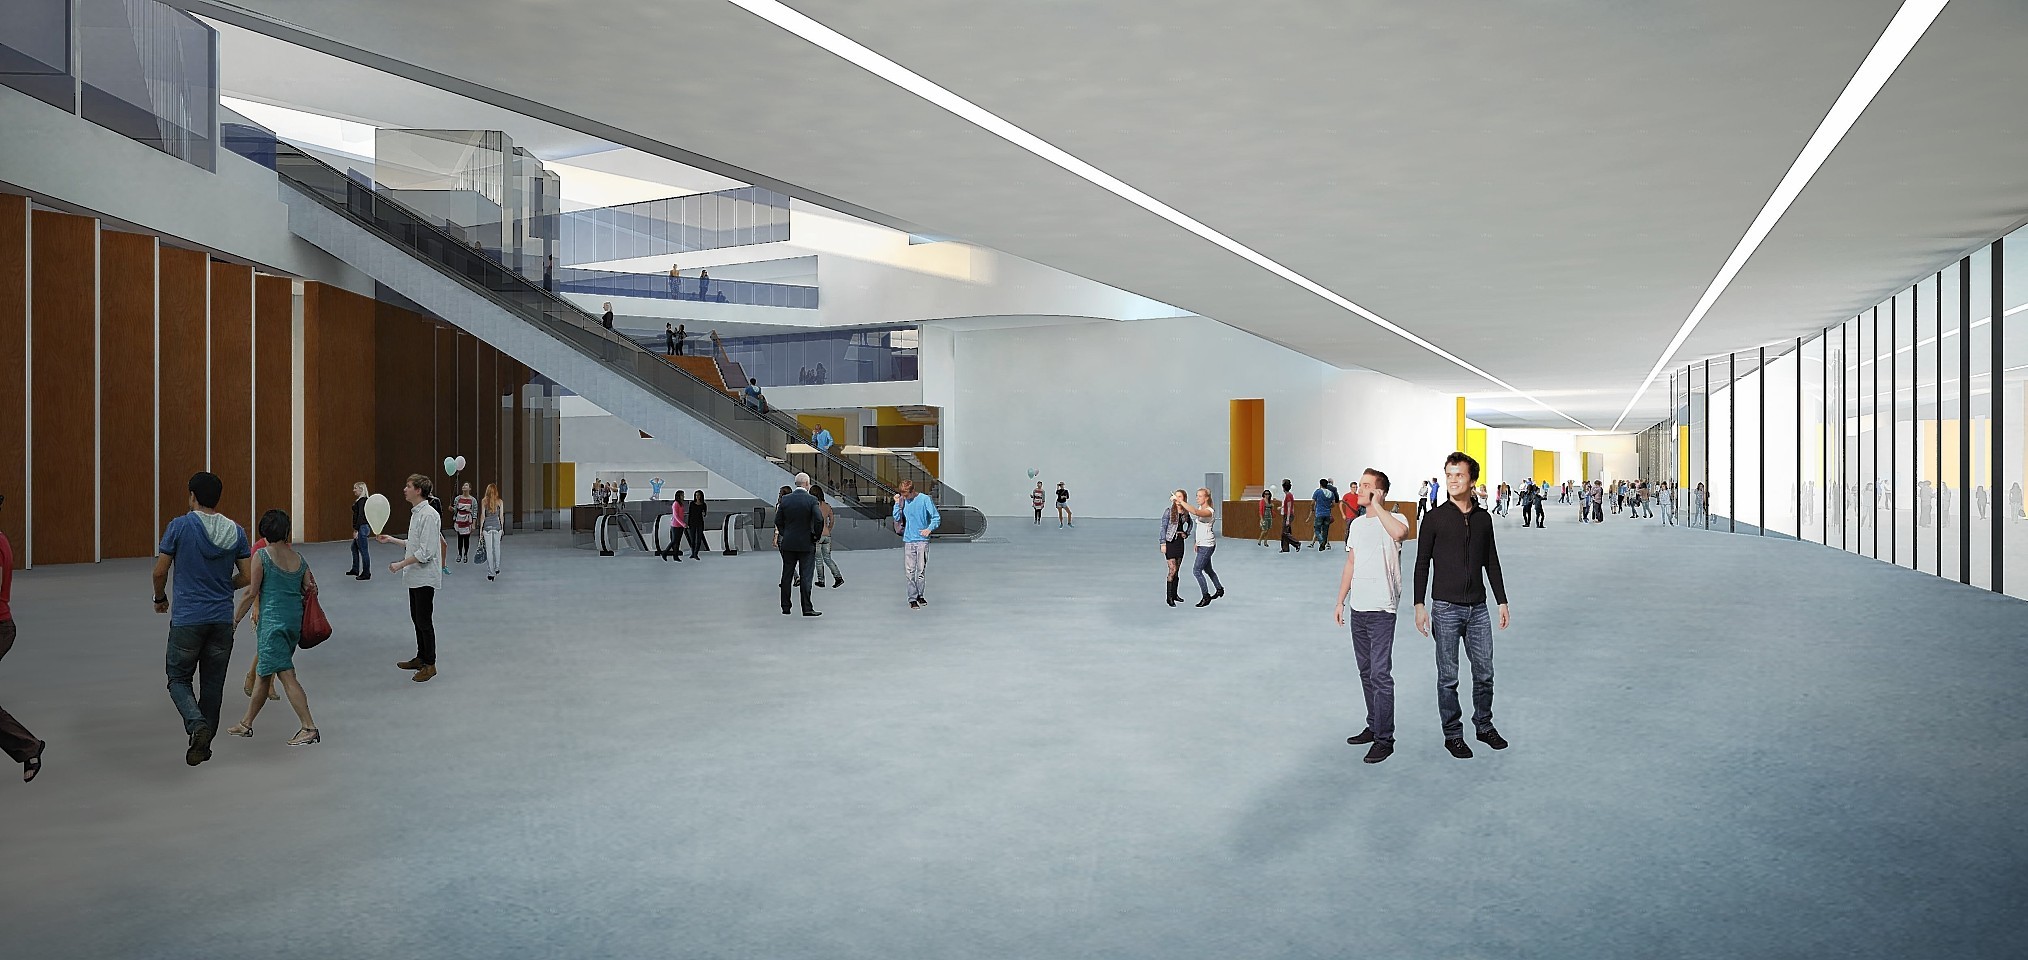 New artist impressions for the AECC